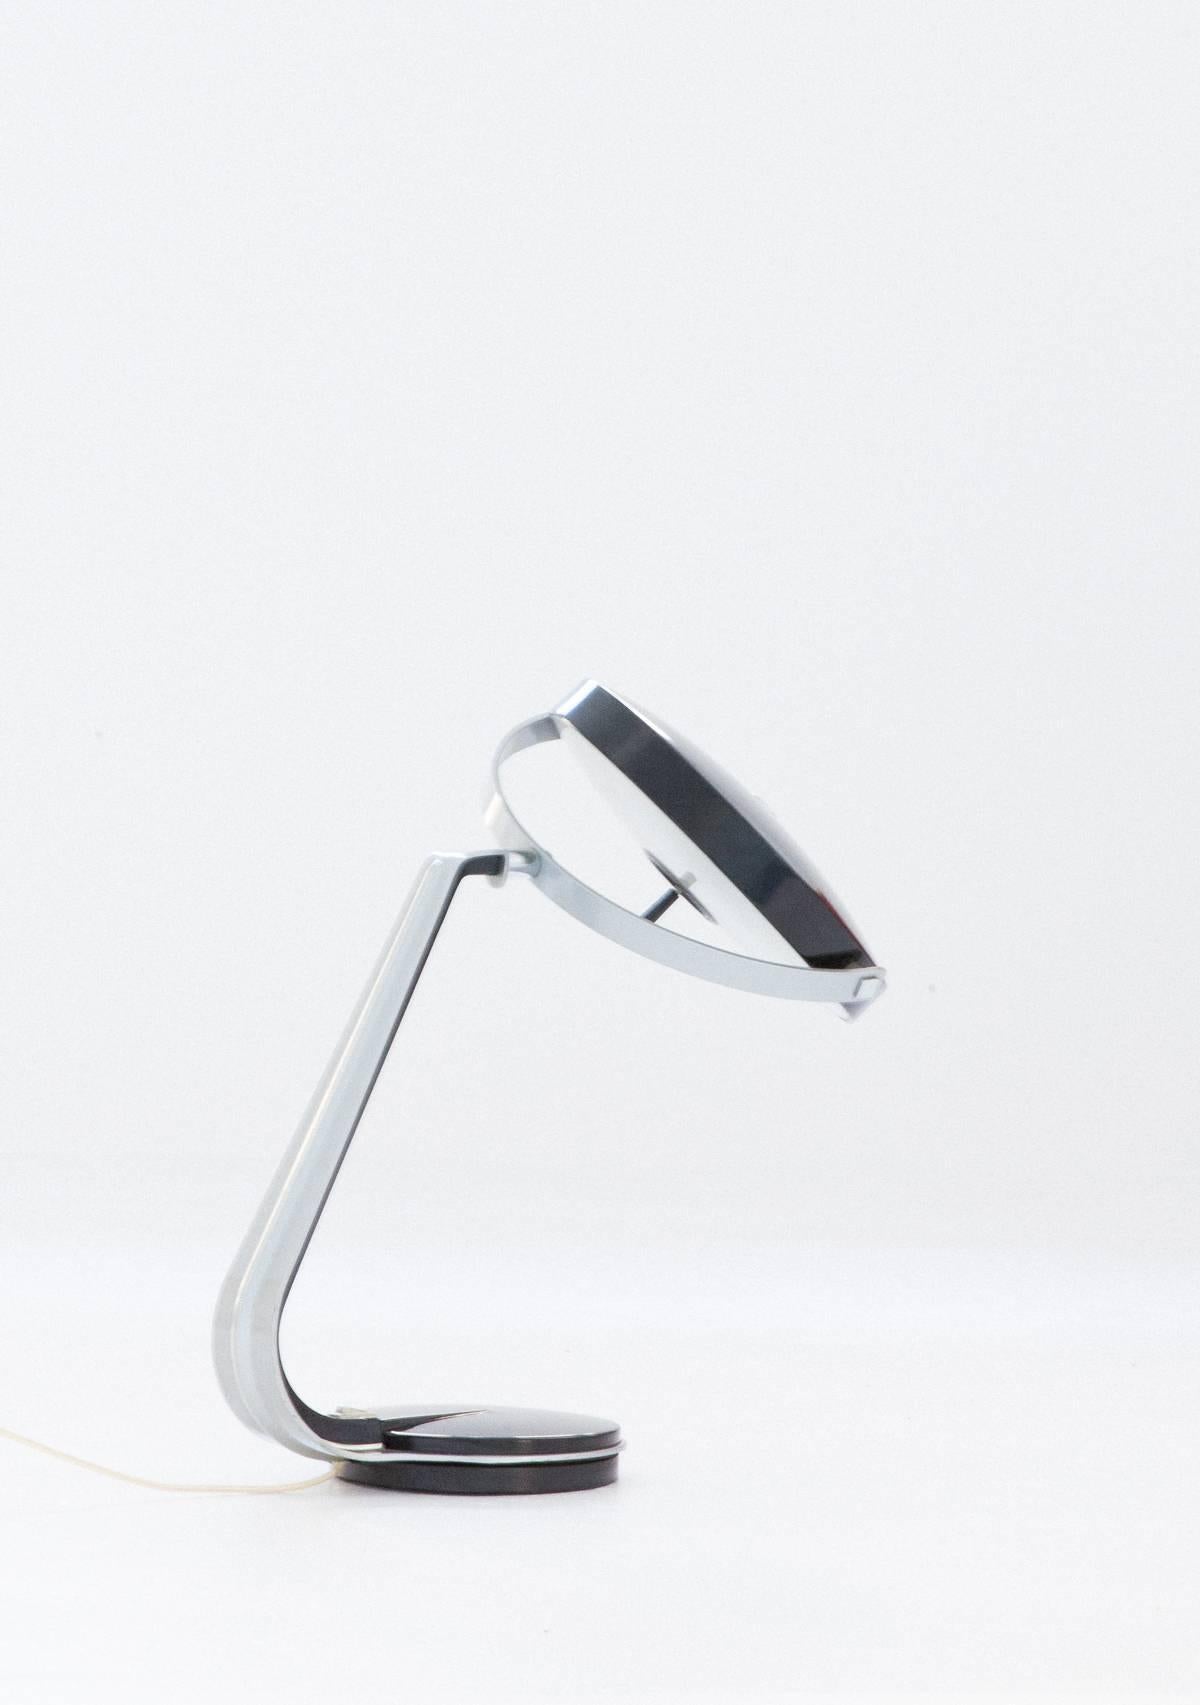 Very rare desk lamp 
Produced by Lupela
Spain, 1960s
Lacquered metal – glass
Very good original conditions.

